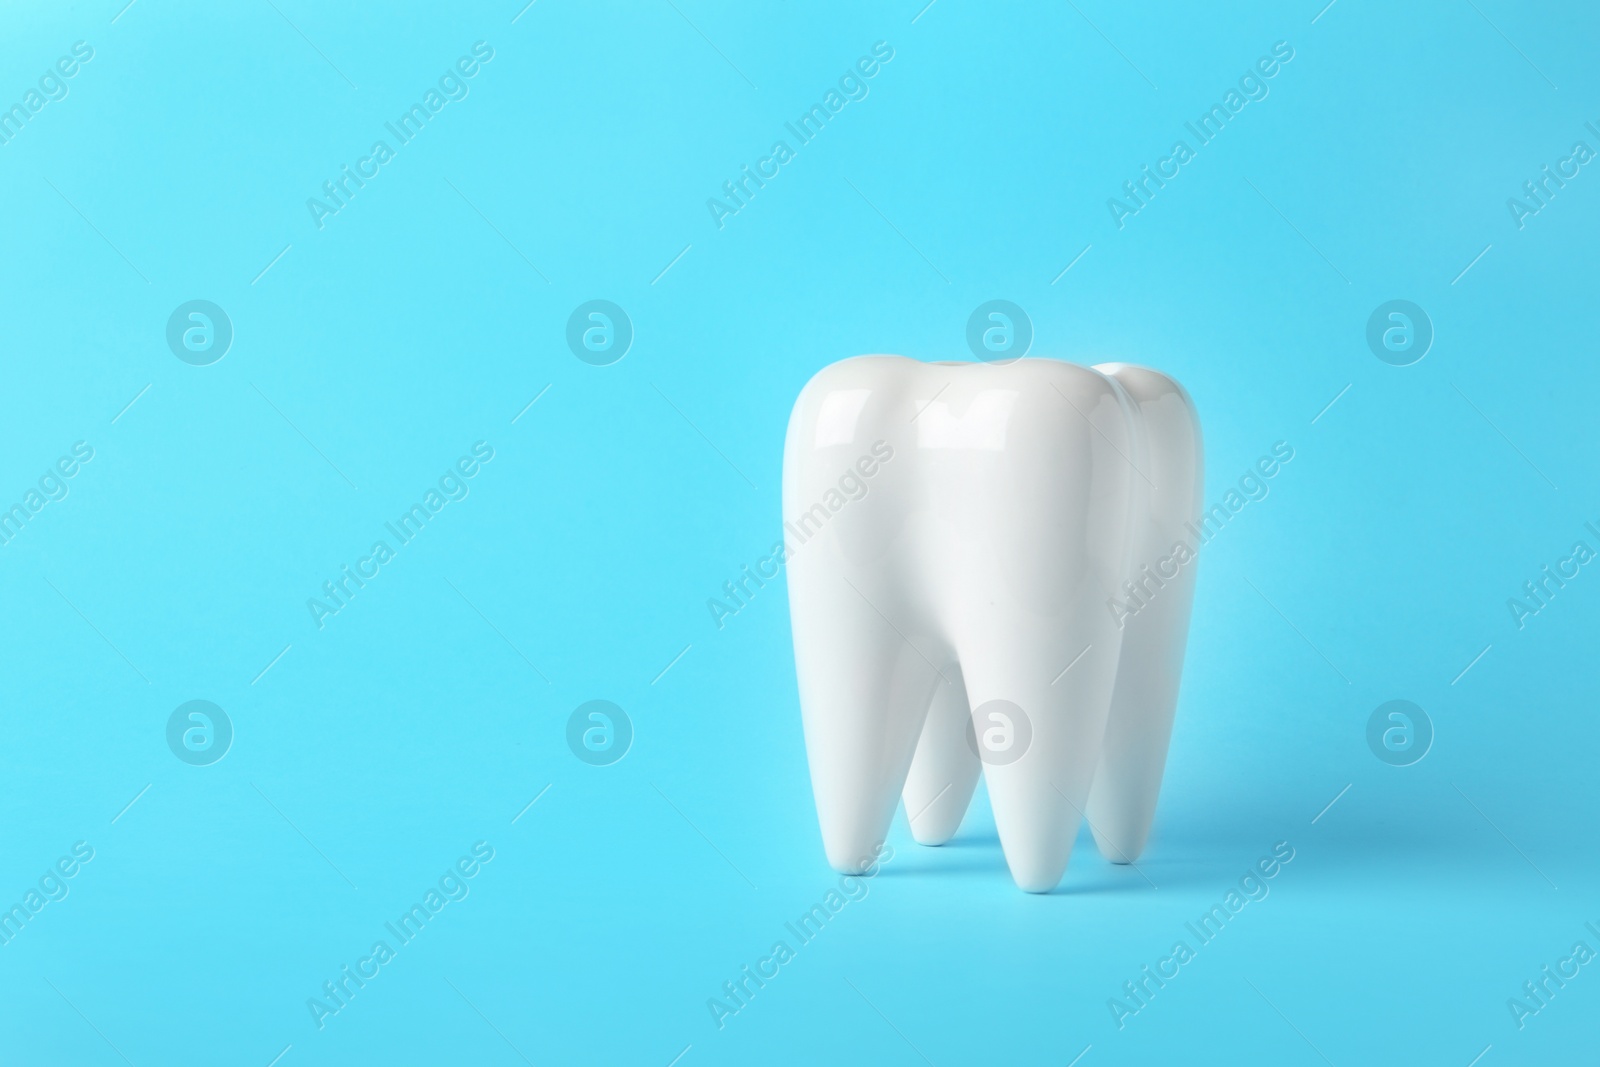 Photo of Ceramic model of tooth on color background. Space for text